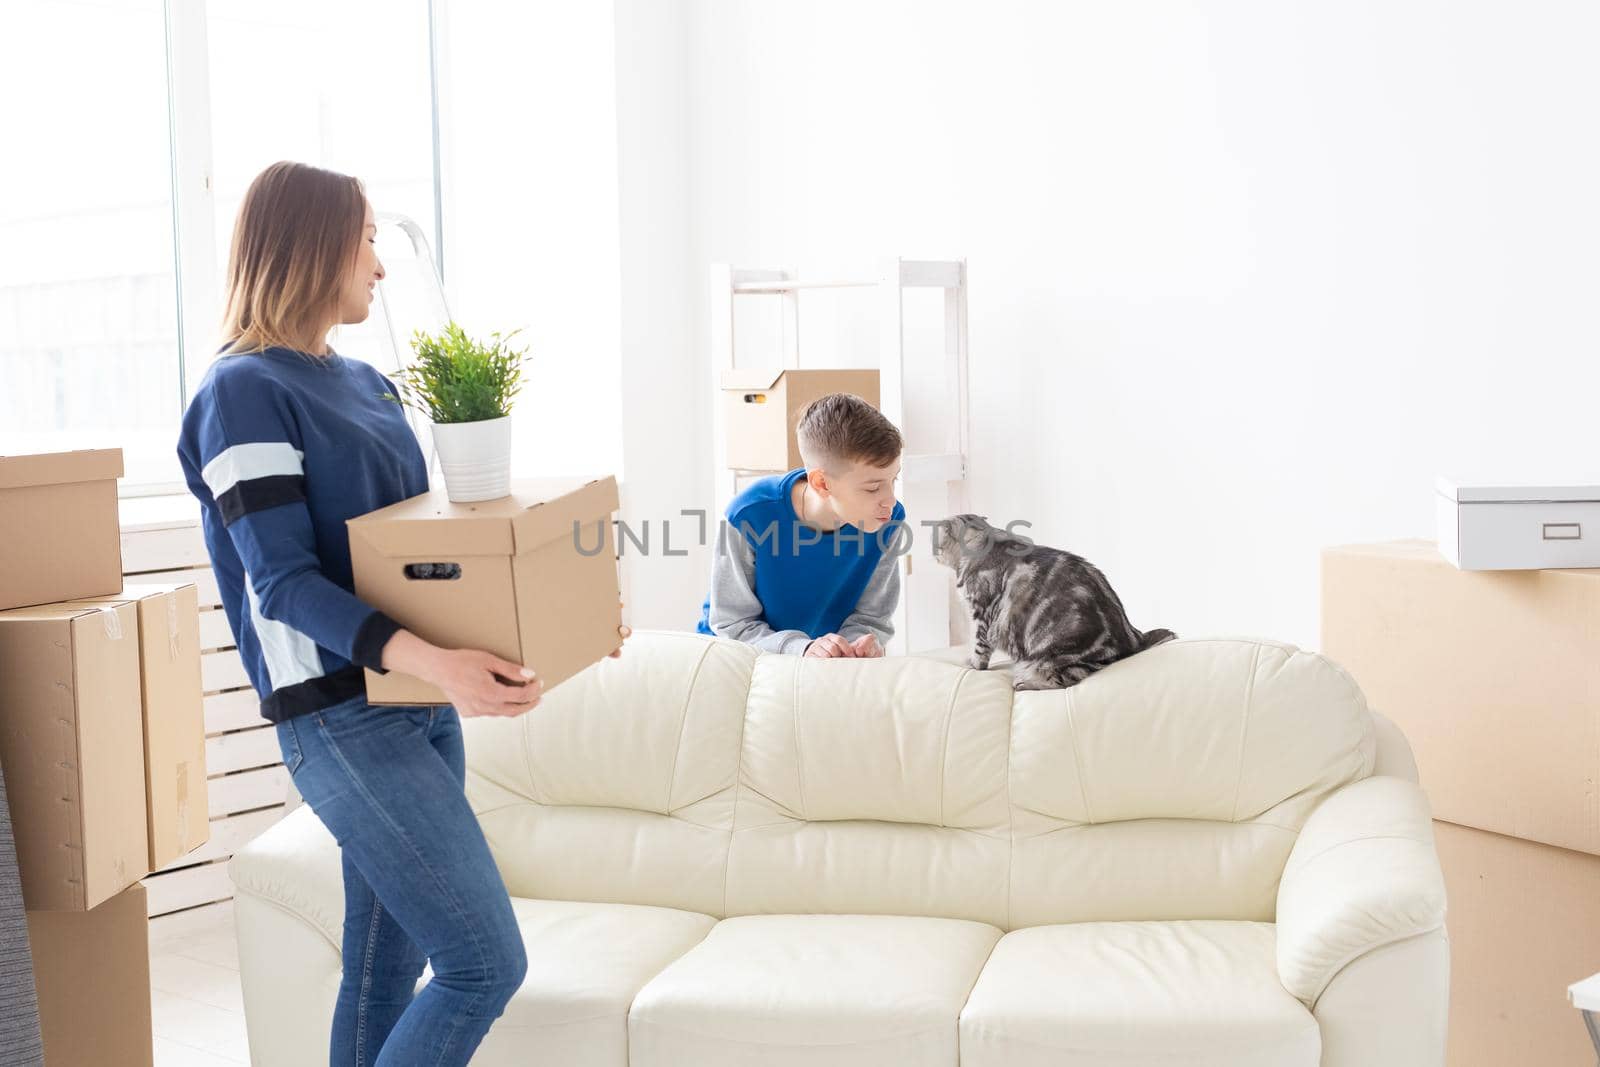 Slim positive young mother and a cute boy son arrange things and communicate with their scottish fold cat. Housewarming and relocation concept by Satura86